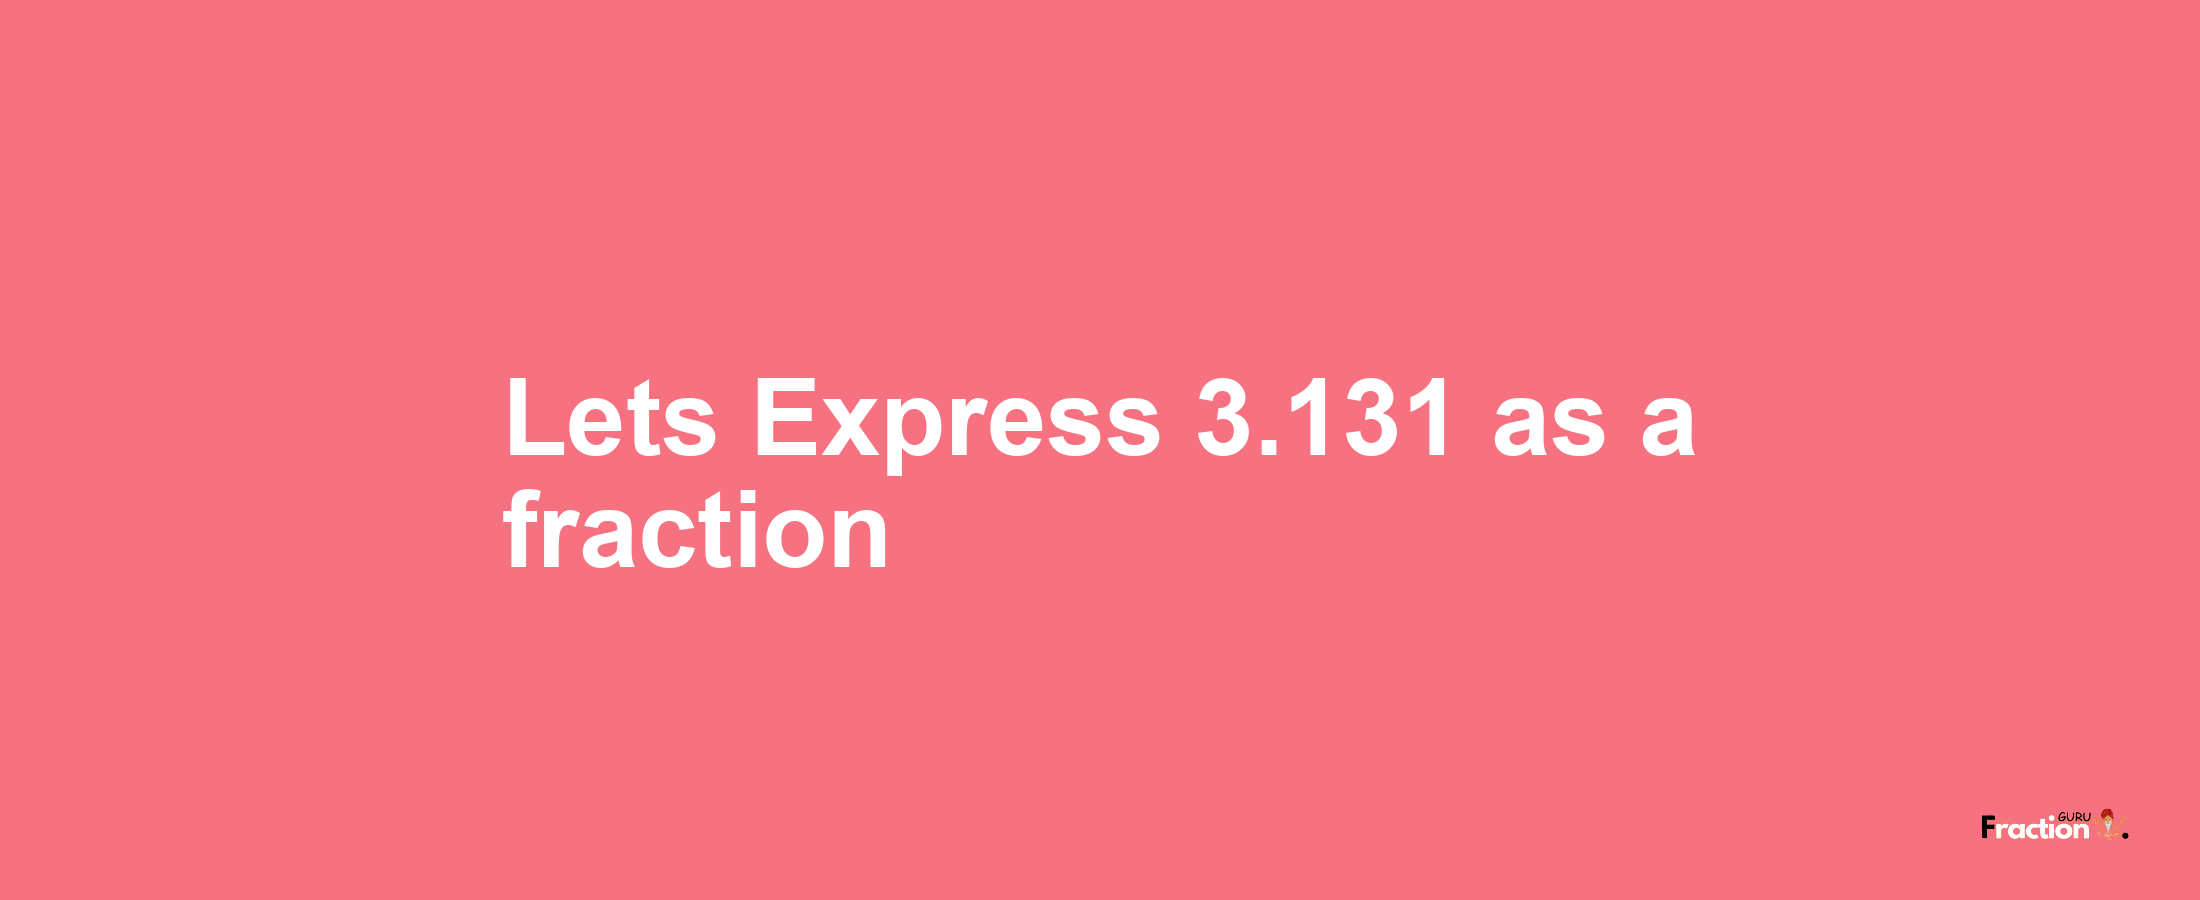 Lets Express 3.131 as afraction